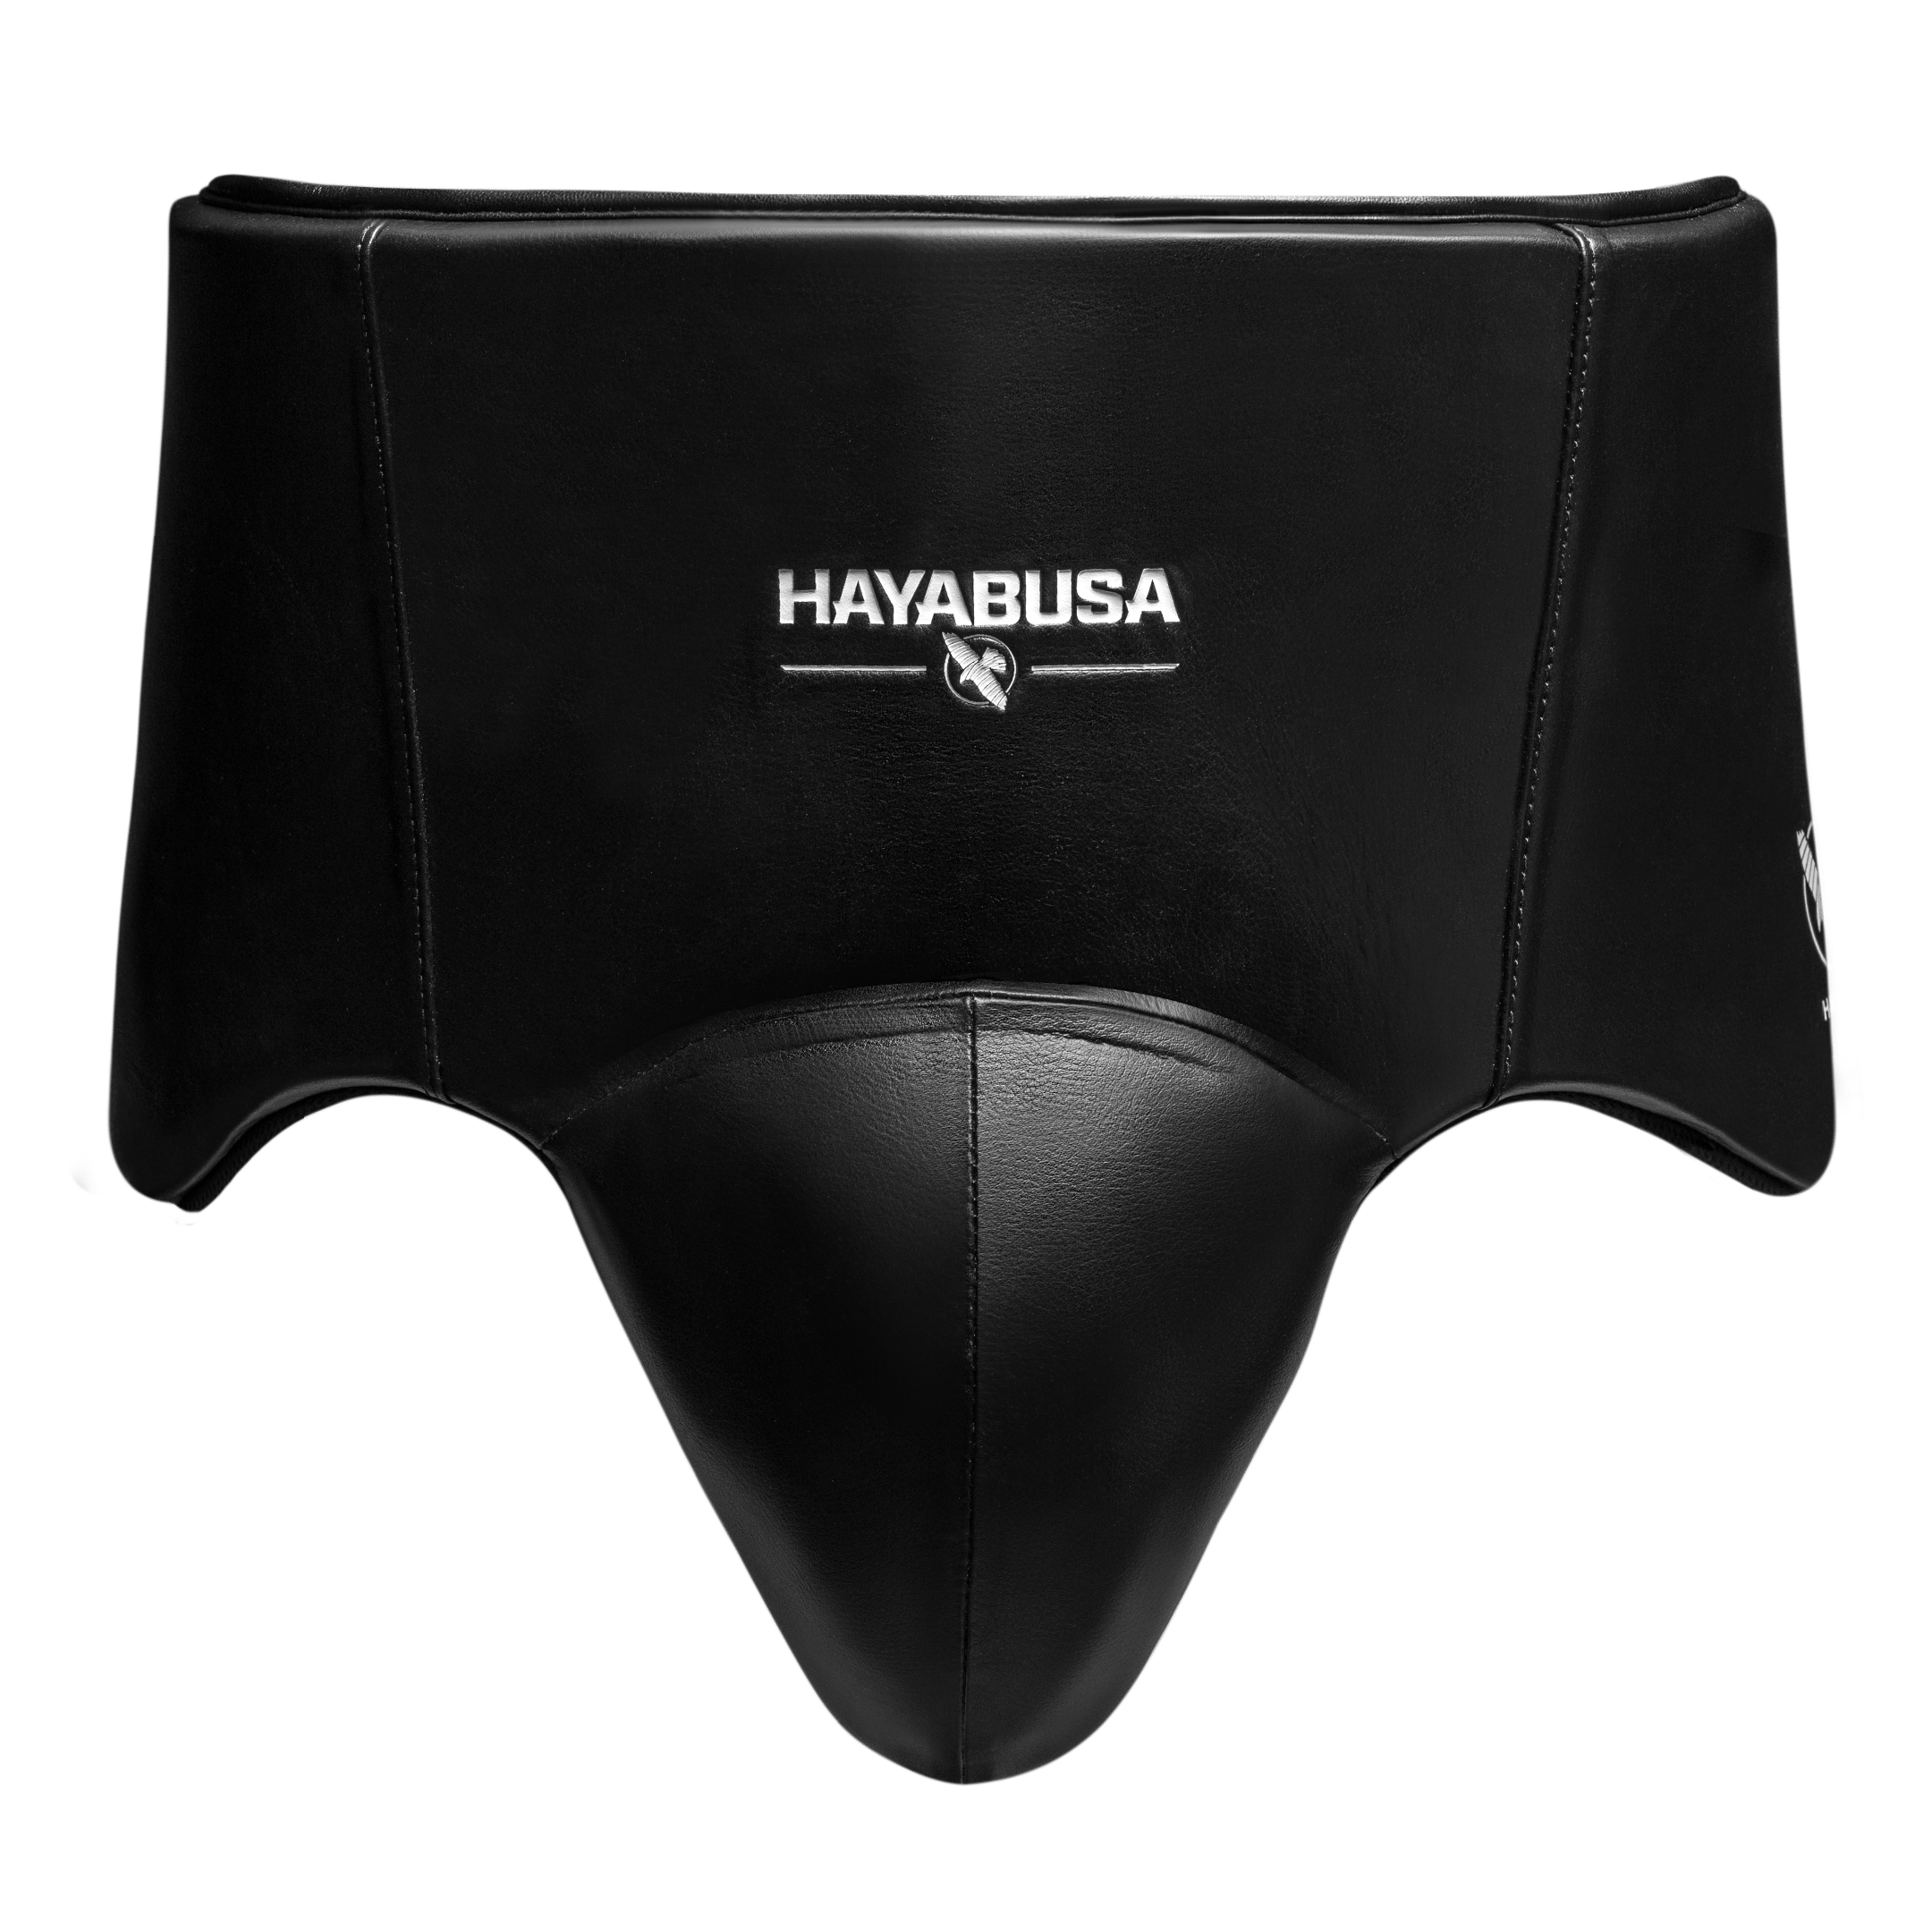 Hayabusa | Pro Boxing Groin Protector - XTC Fitness - Exercise Equipment Superstore - Canada - Groin Protection